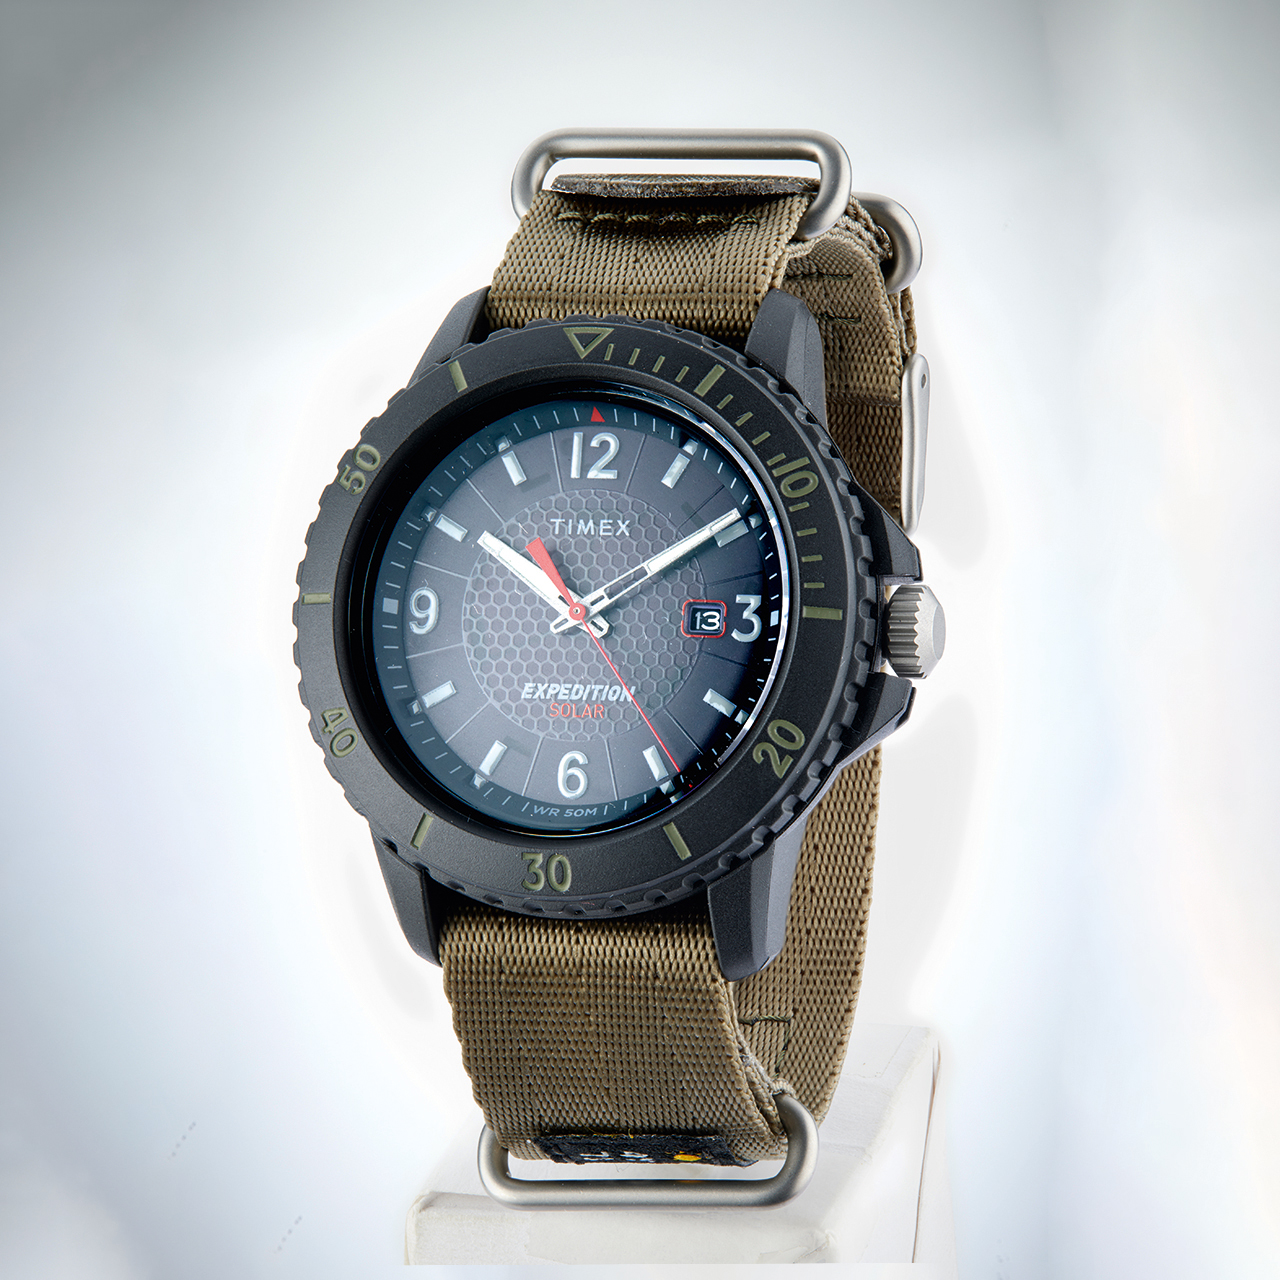 Timex Men's Expedition Watch with Brown LeatherBand - QVC.com